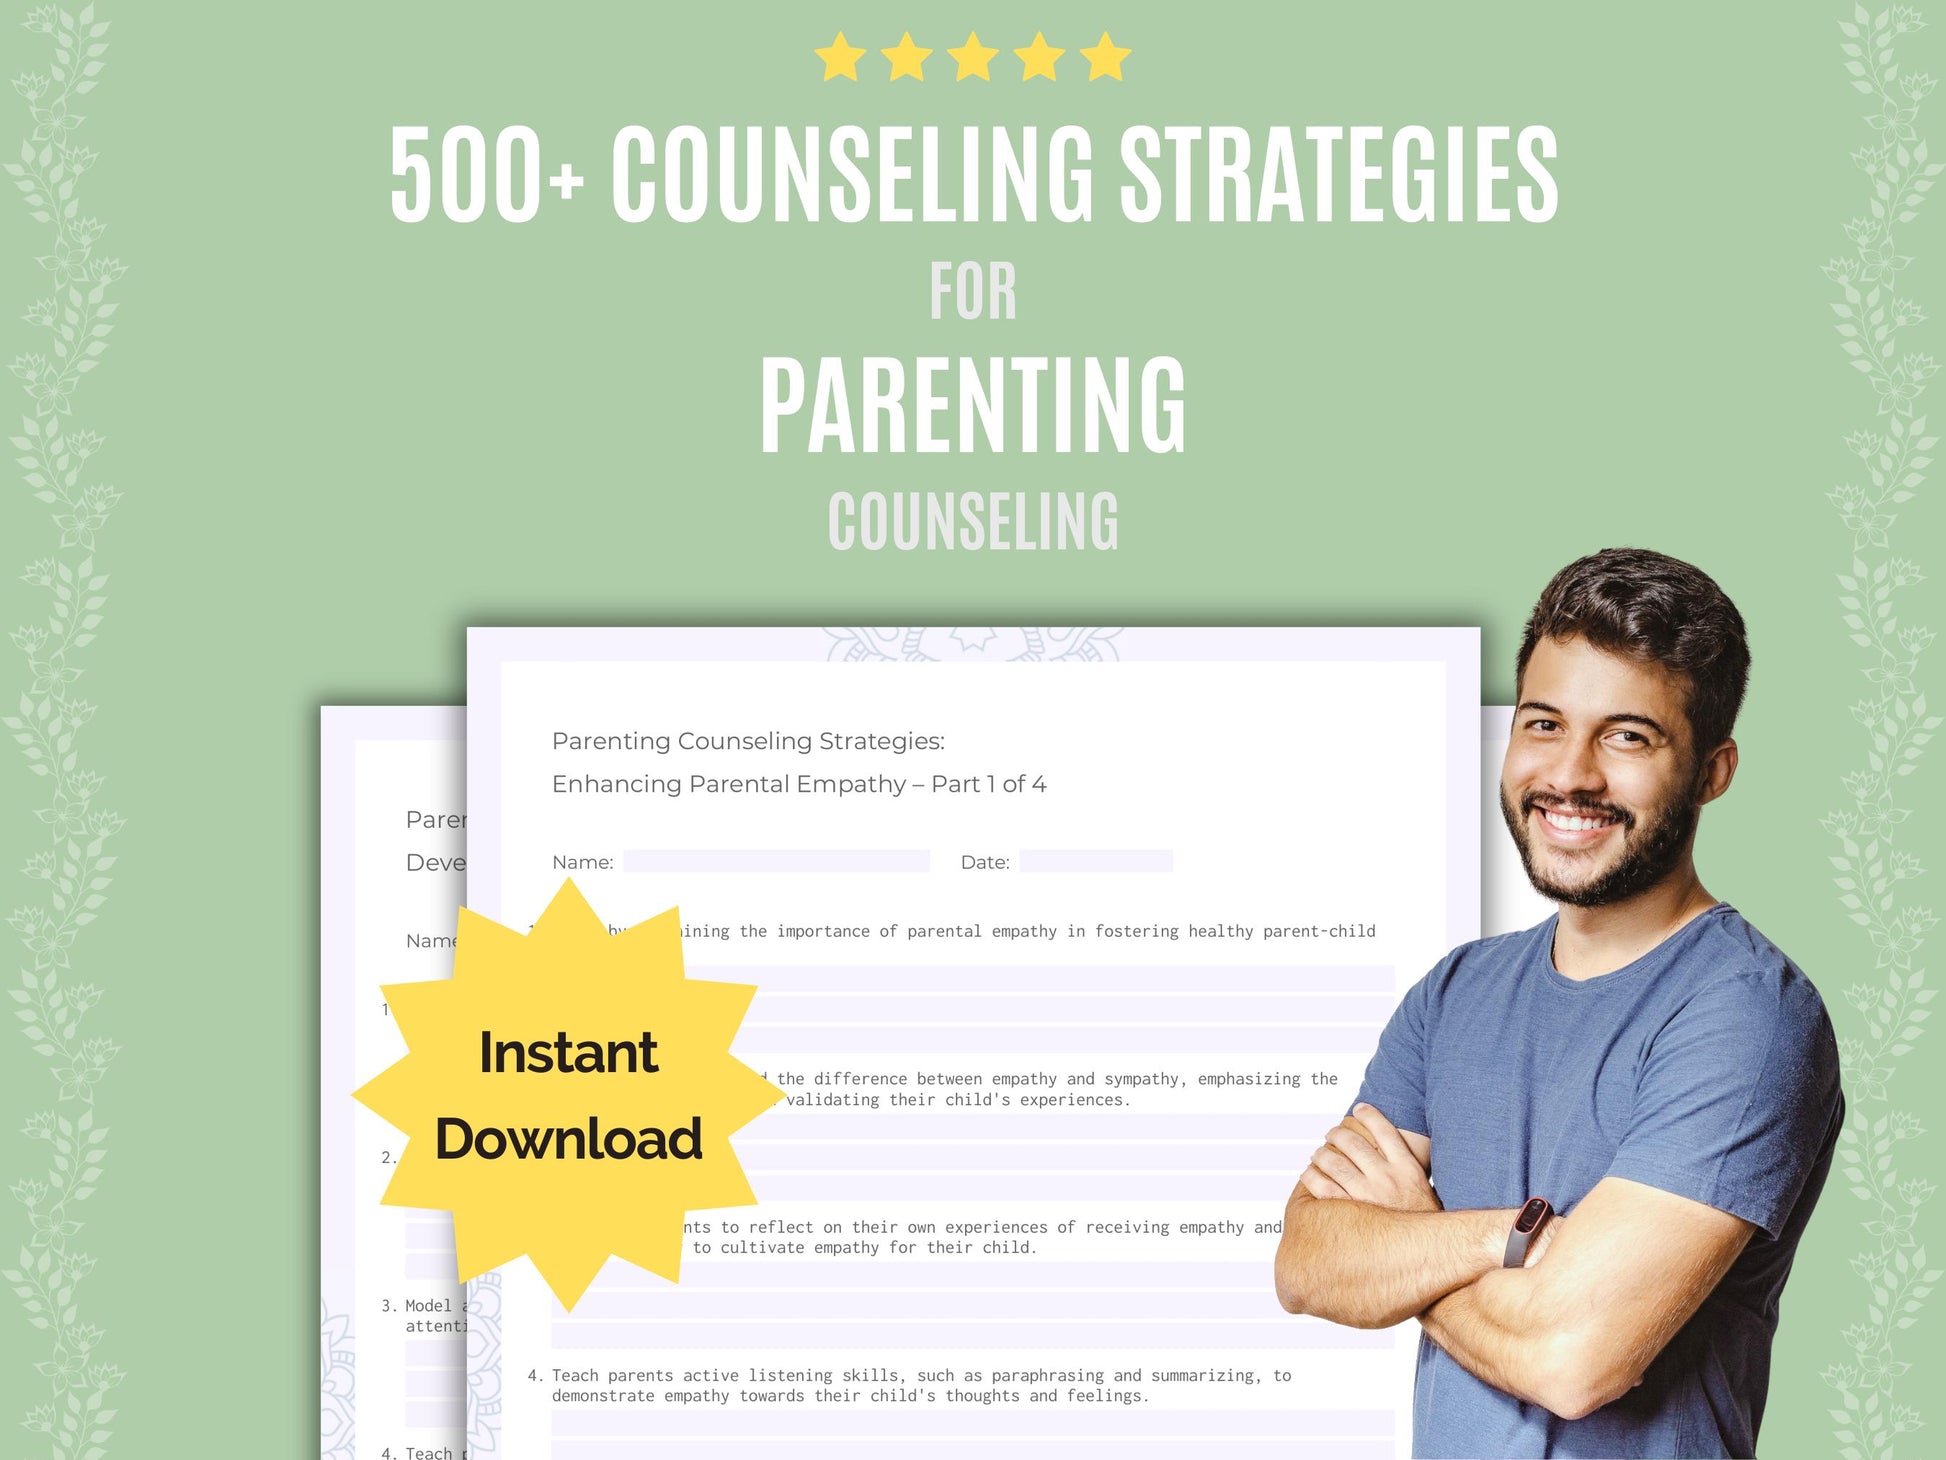 Parenting Counseling Strategies